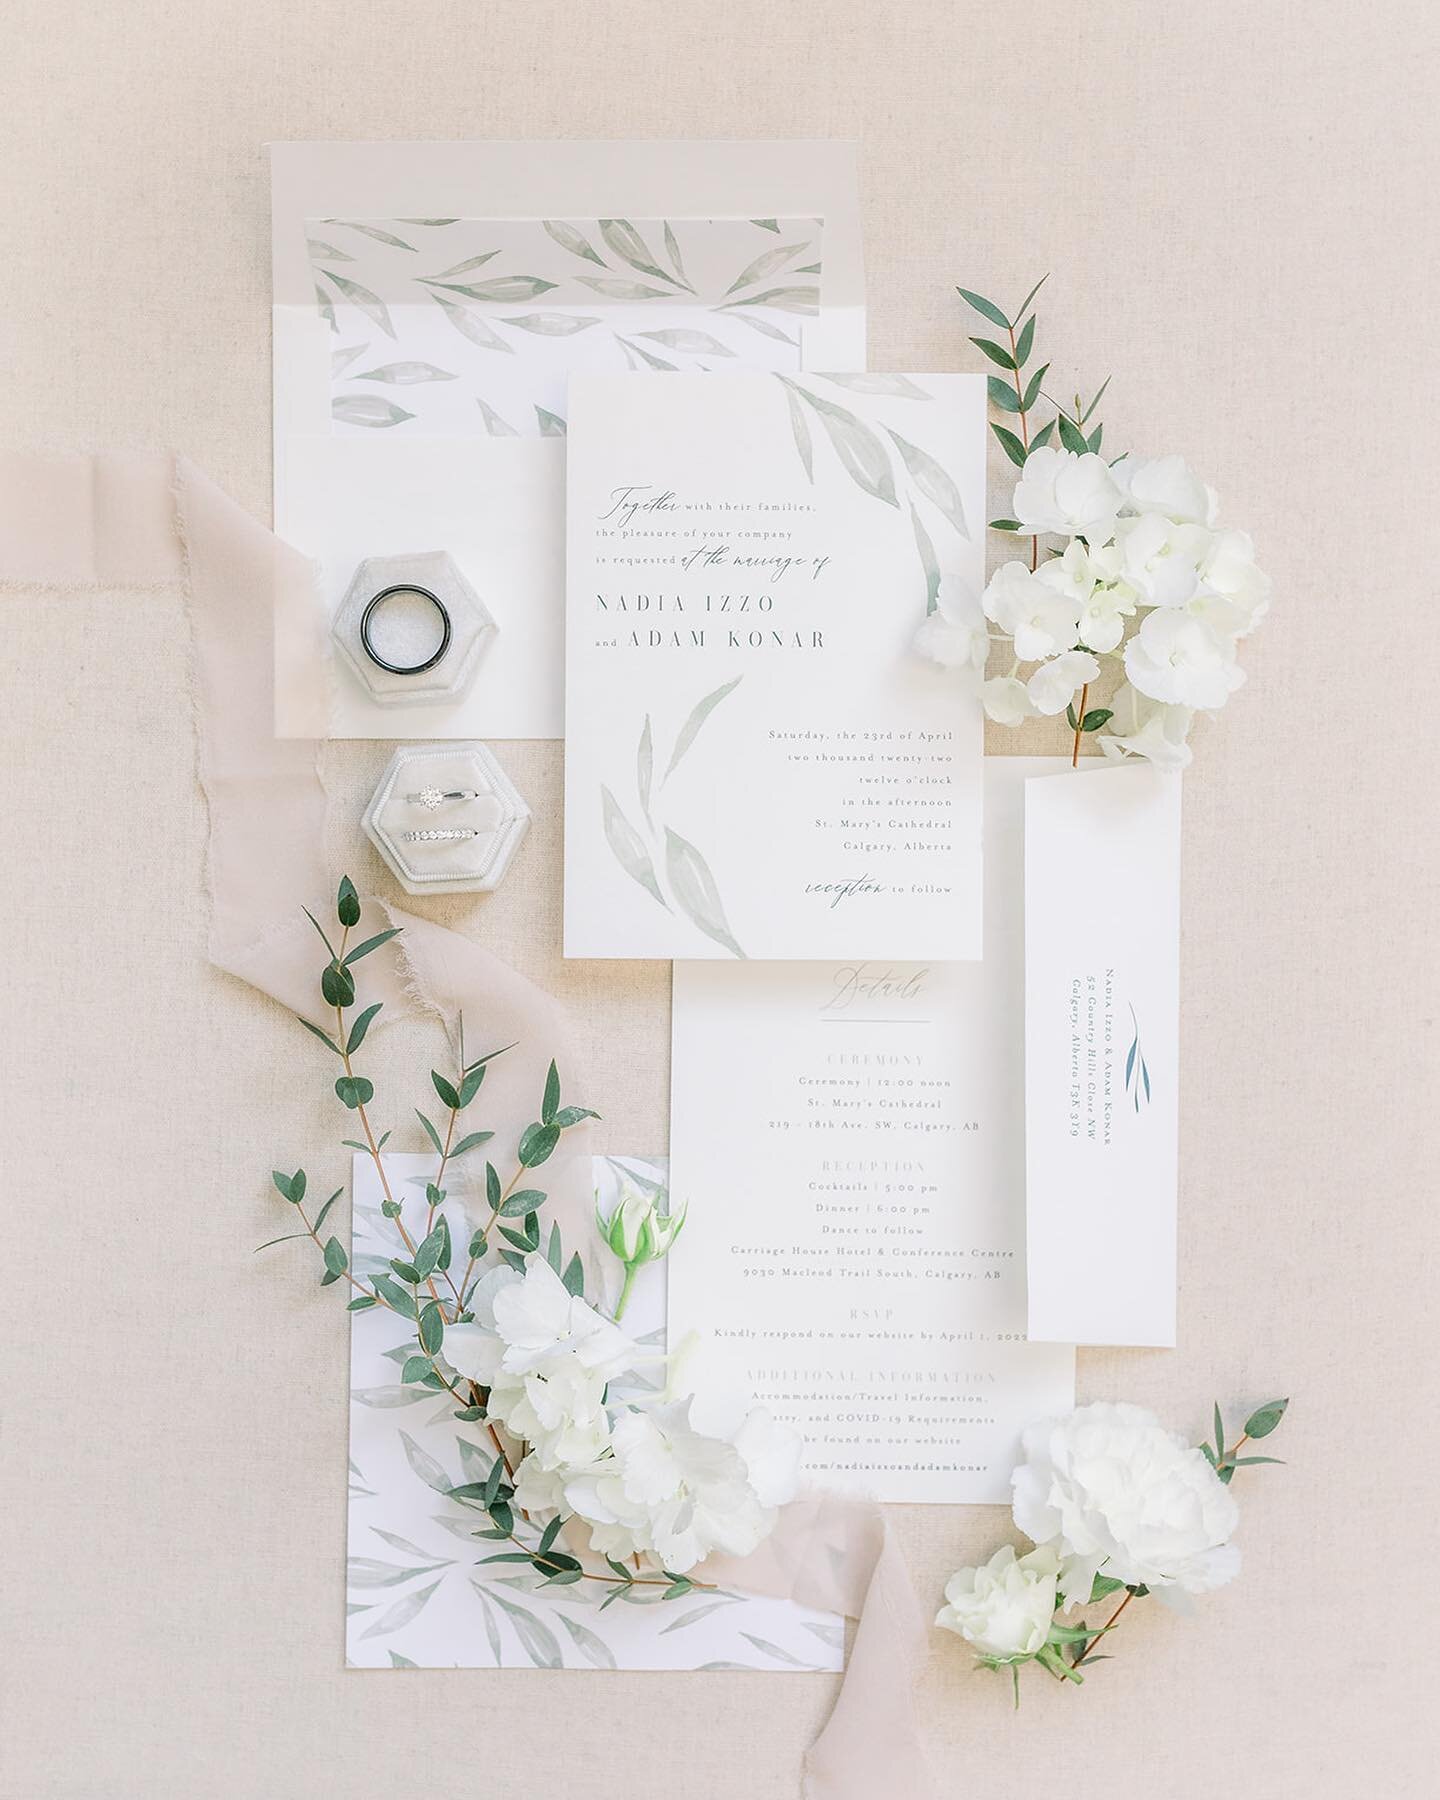 WEDDING PRO TIP:

ask your florist if they are able to leave you any extra clippings in a bag for your flat lay photos! It adds such a nice touch 😍 Thank you @occasionalbloomyyc for including extras for this wedding!

what would your wedding tips be